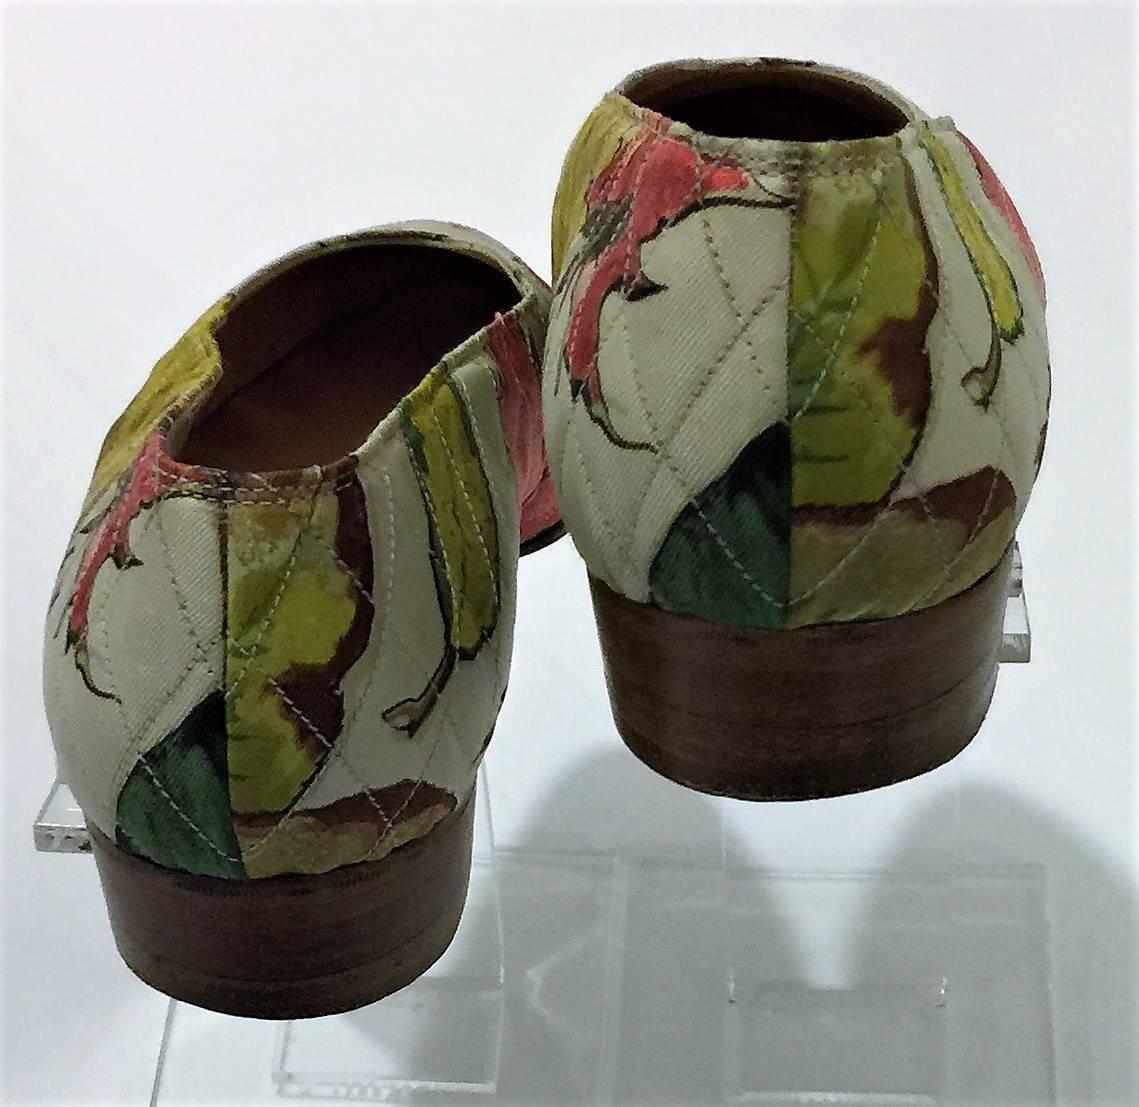 Hermes Ballet Pumps ‘Tourbillon’ a signature print by Christine Vauzelles for Hermes. Vintage 1985.  Made in France.  100% Silk Quilted Silk; Leather Lined; Leather Sole; Flat Stacked Heel.  Small fit EU 39E.  Colors are Multi Red/Green/Gold. Very